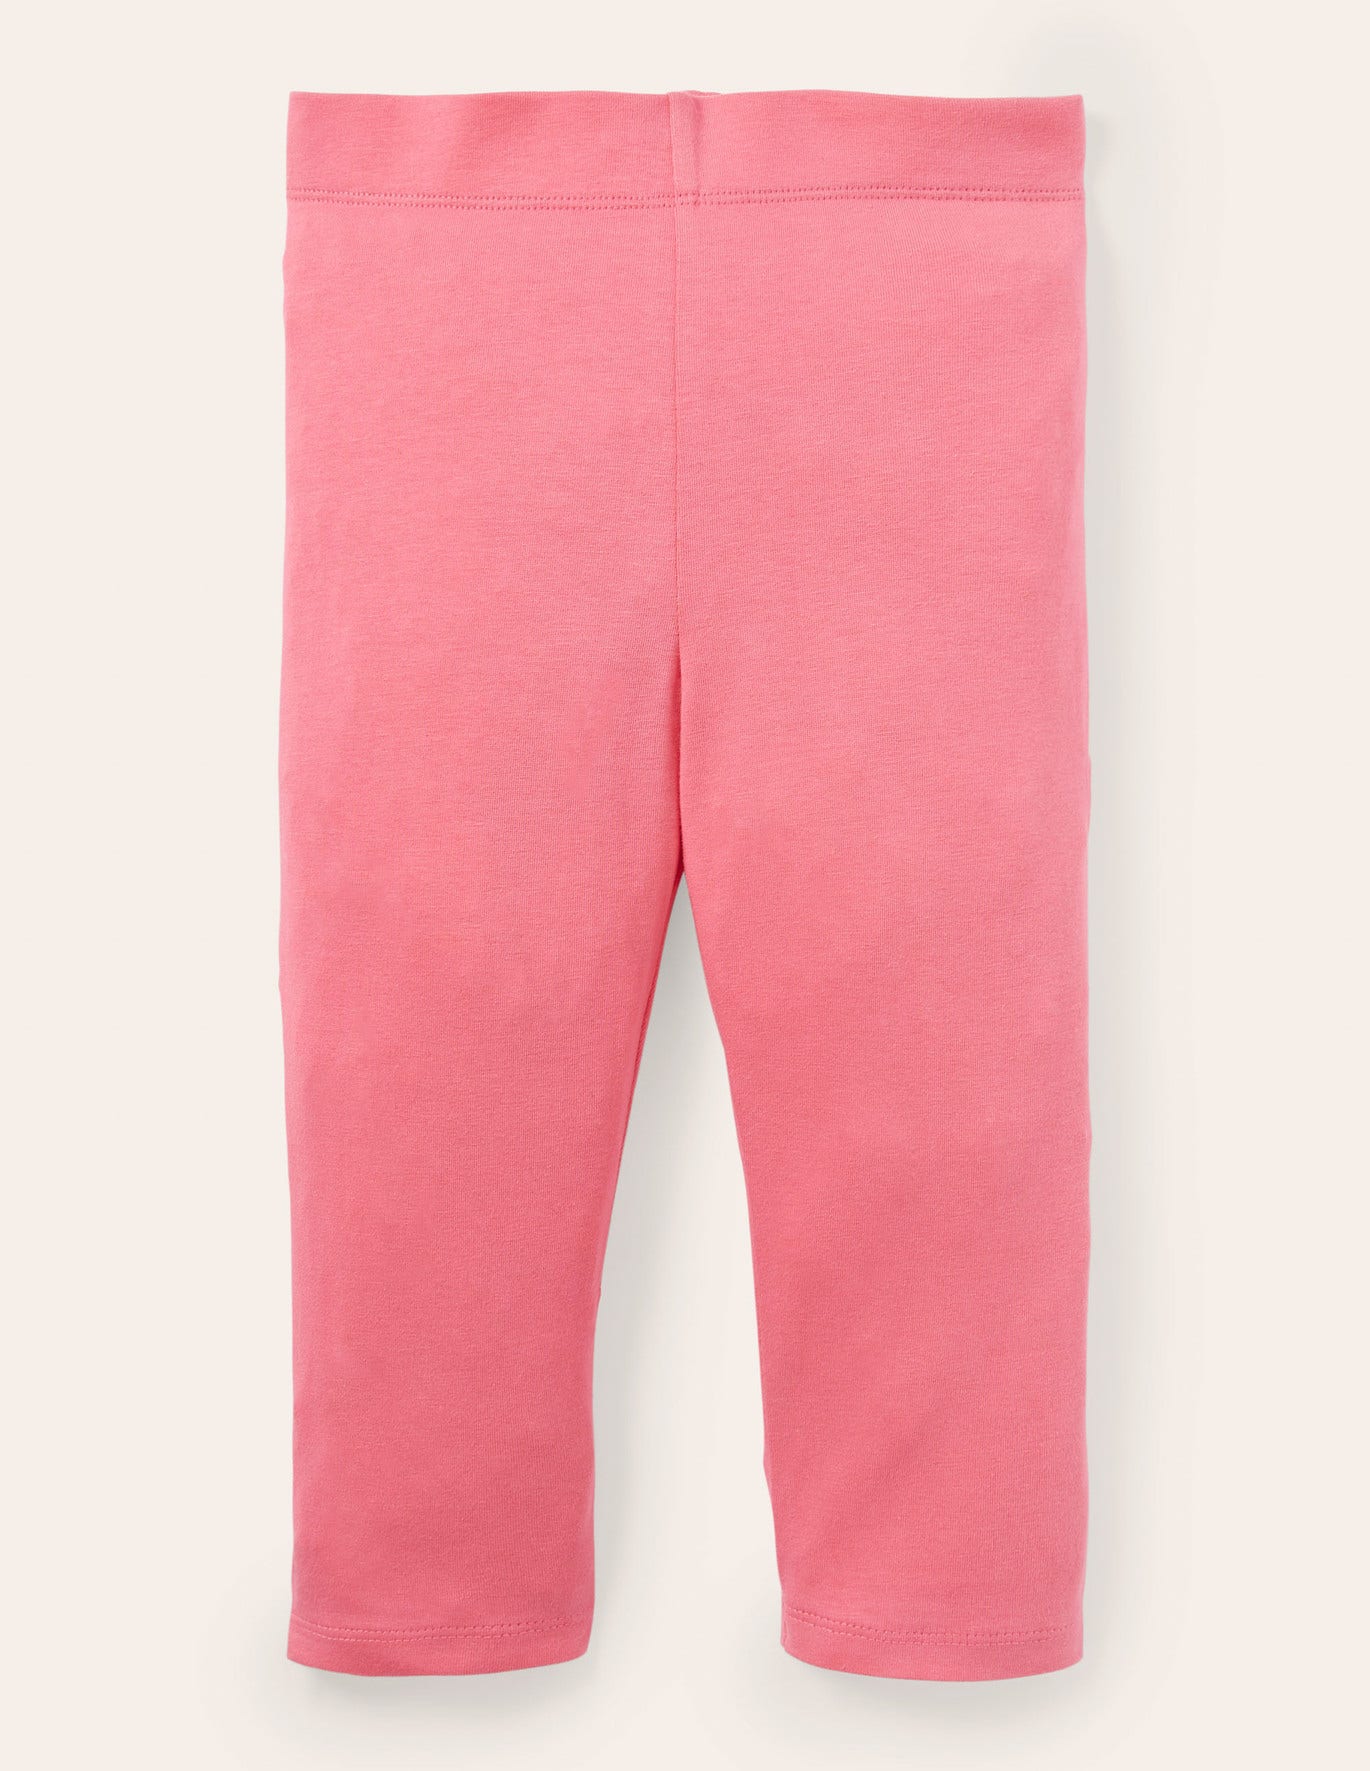 Boden Plain Cropped Leggings - Bright Camelia Pink